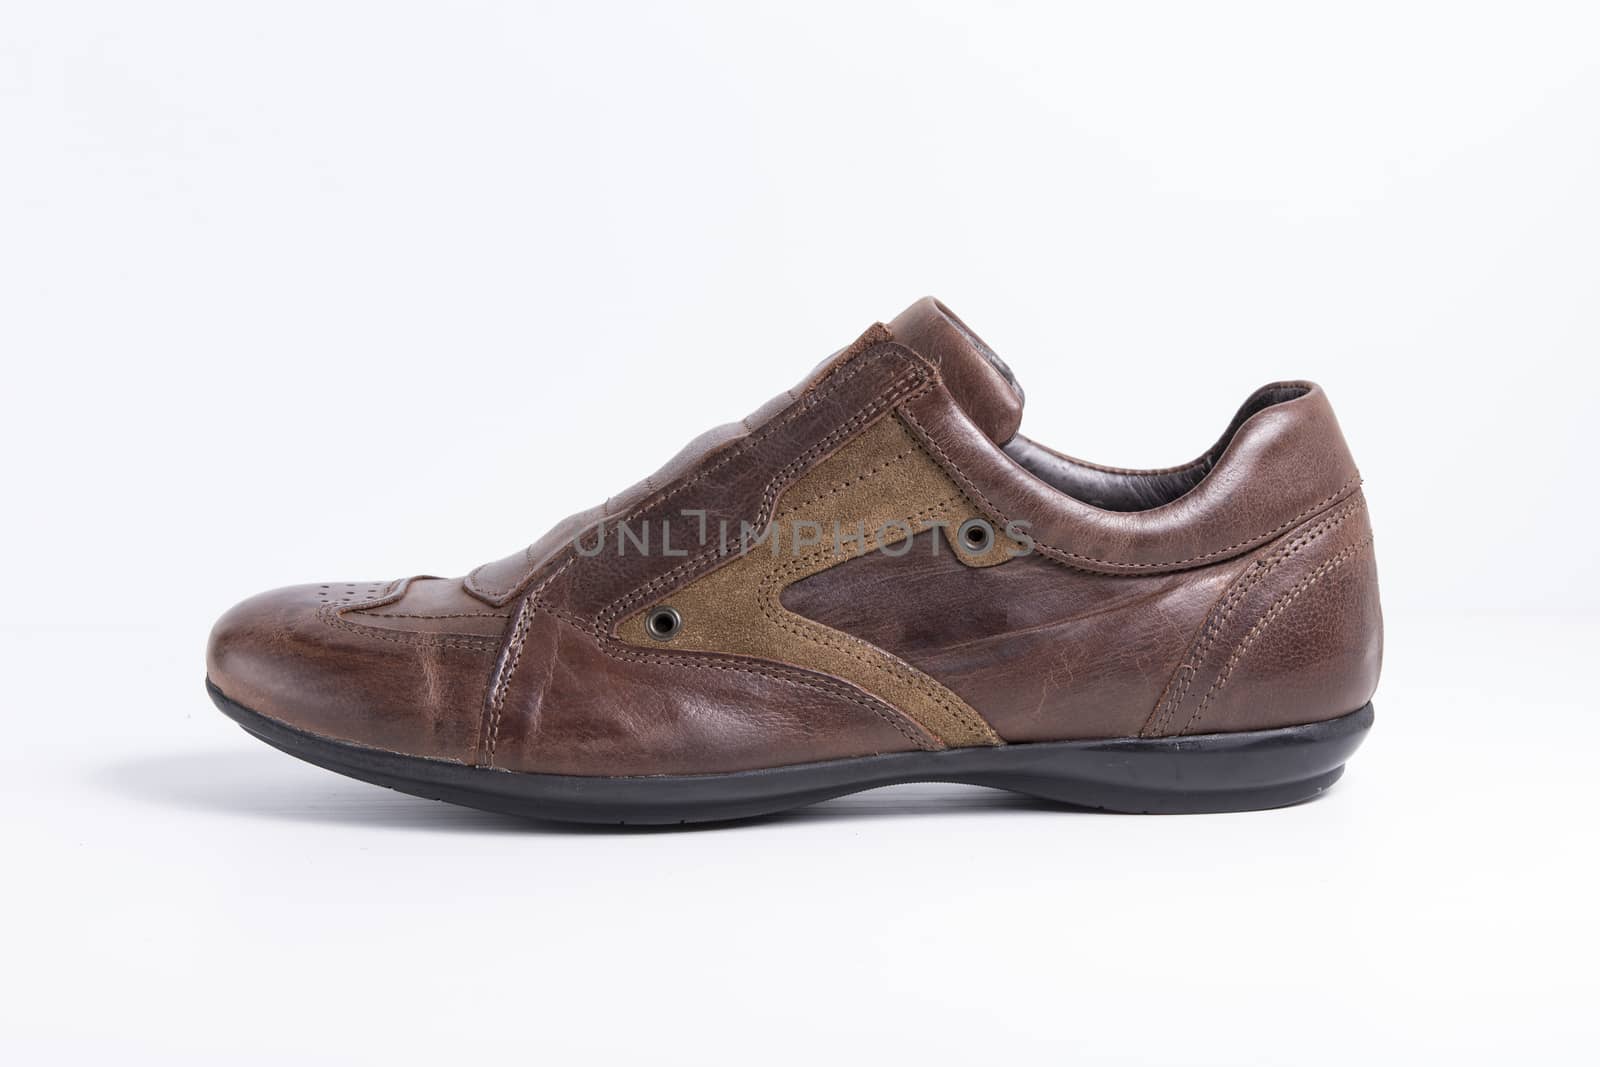 Brown leather shoe on white background, isolated product.